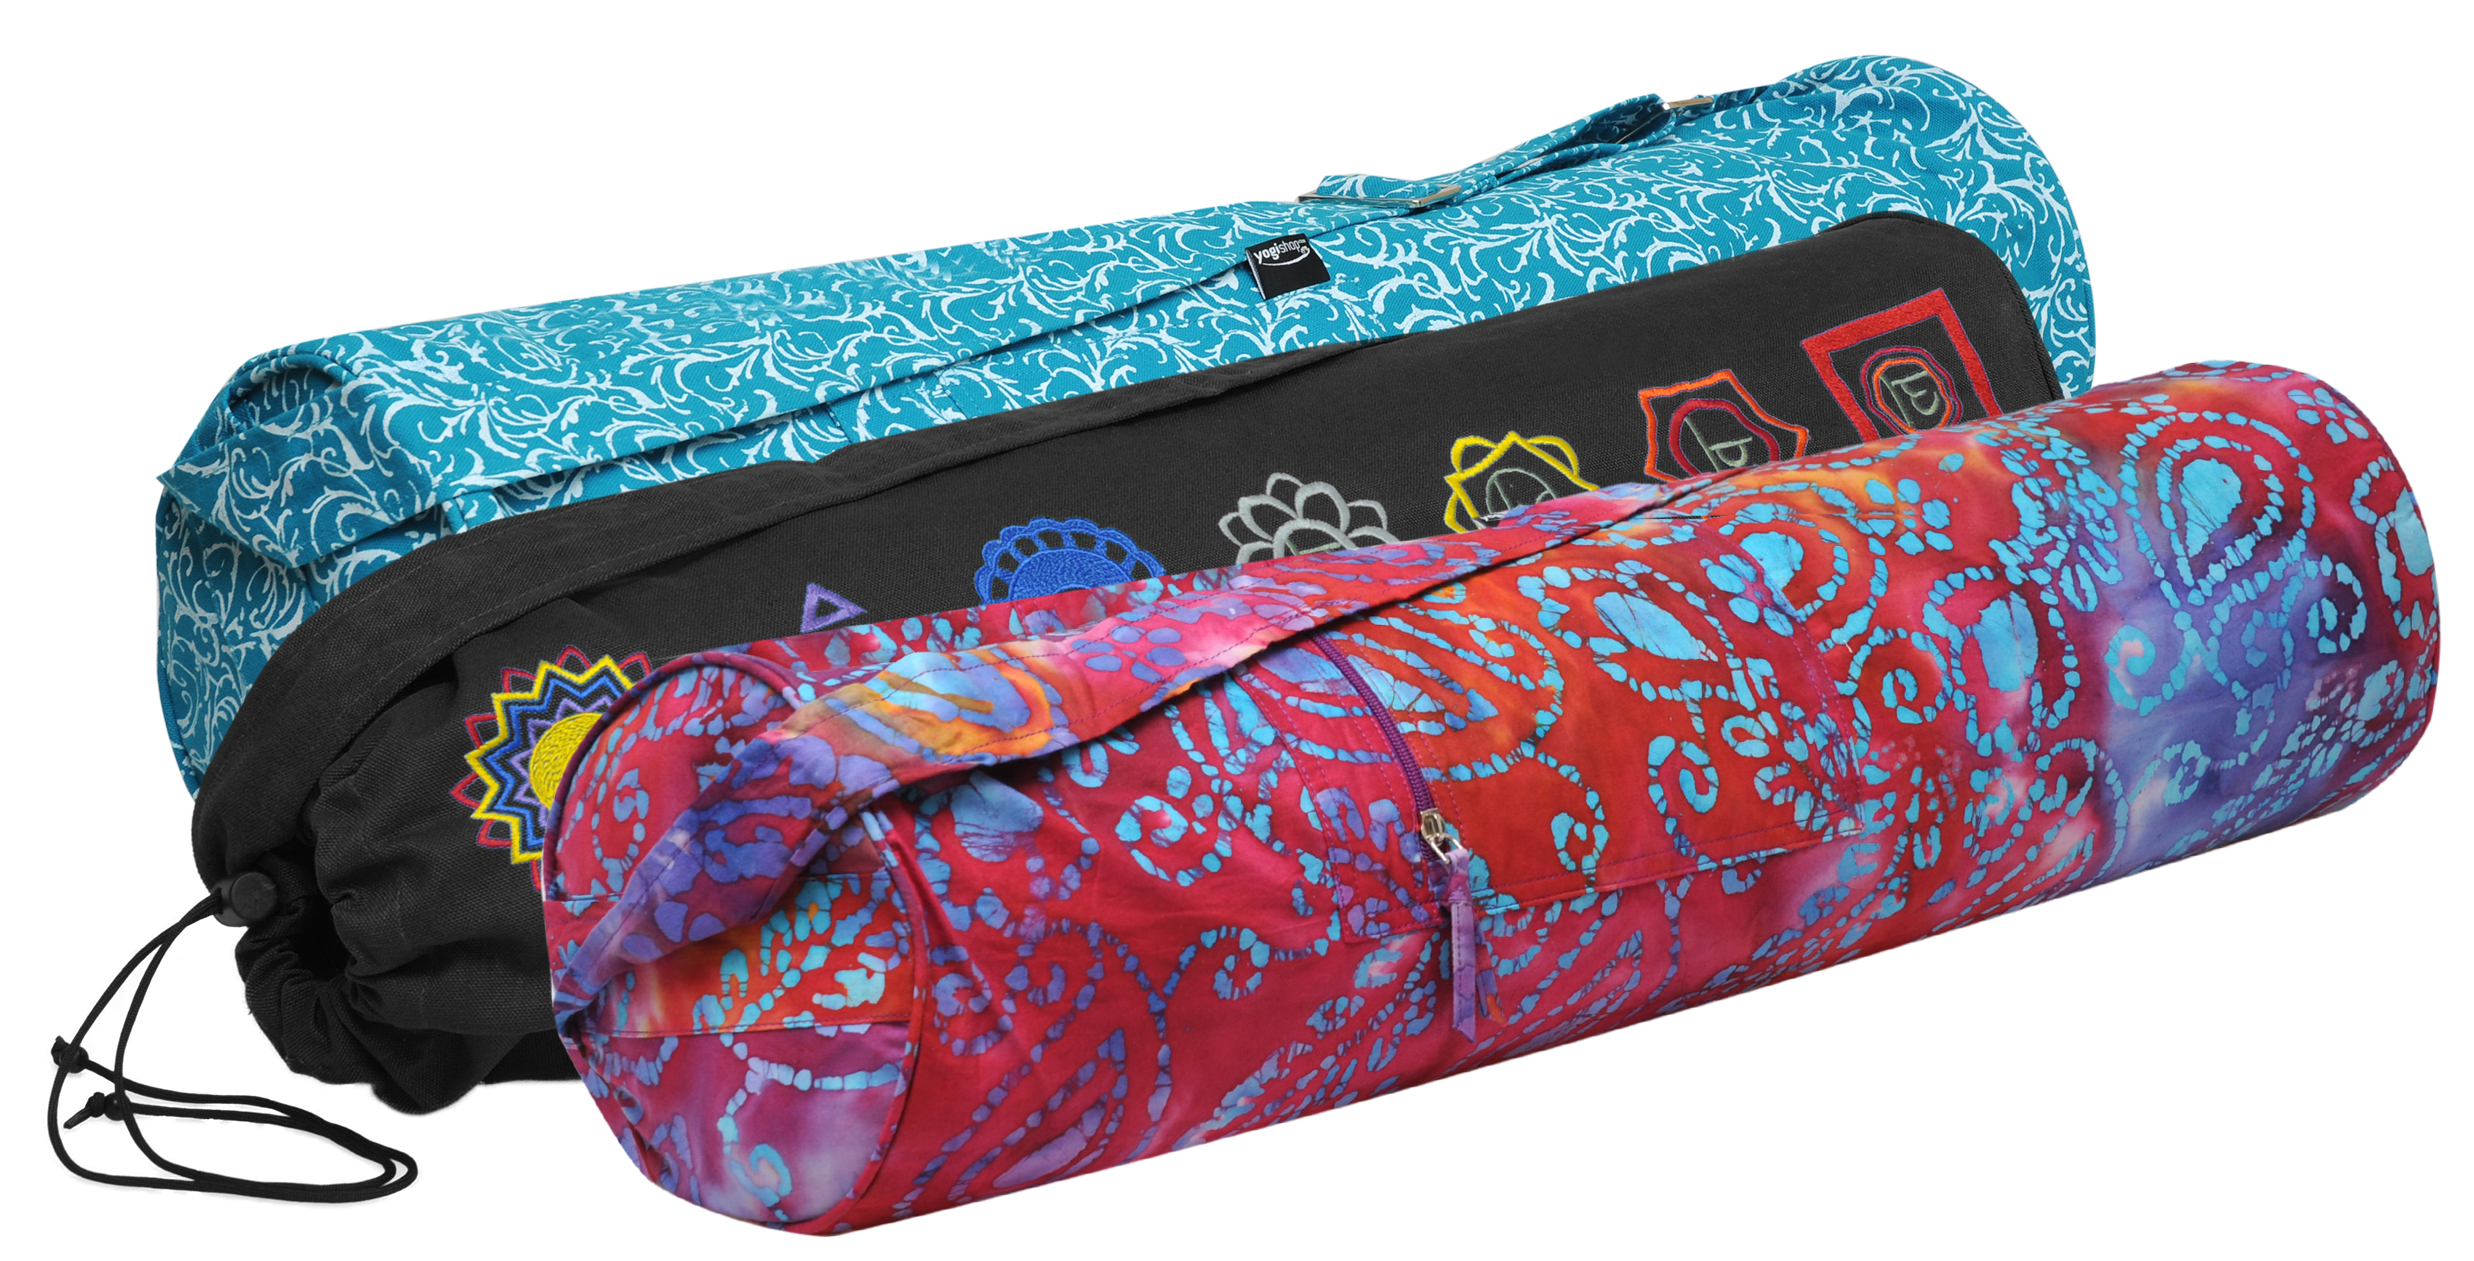 NETTIE Yoga Mat Cotton Carry Bag with Strap – Standard Size |